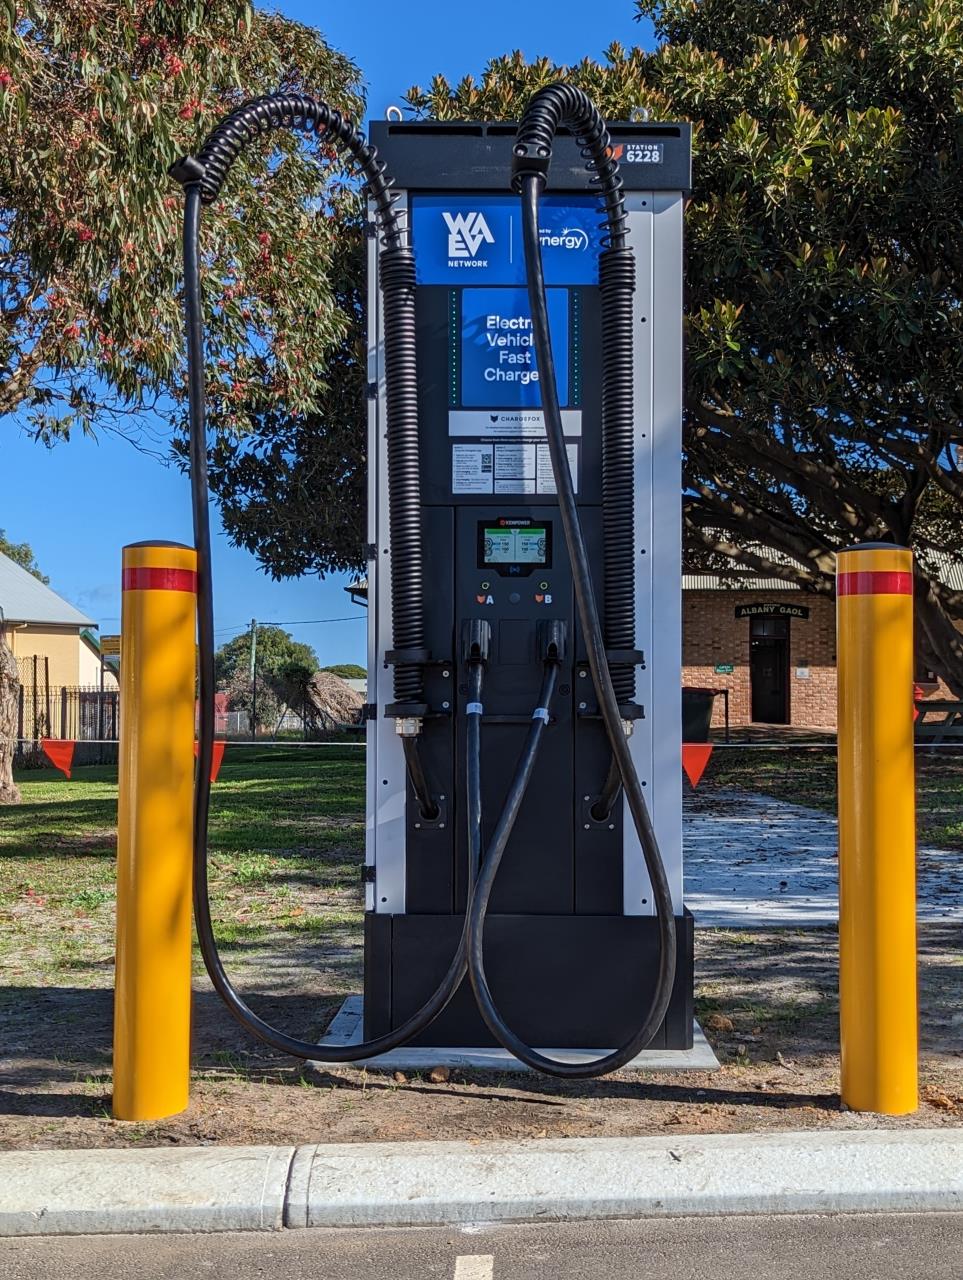 EV fast charger, Old Gaol Museum Carpark. View of front of charger